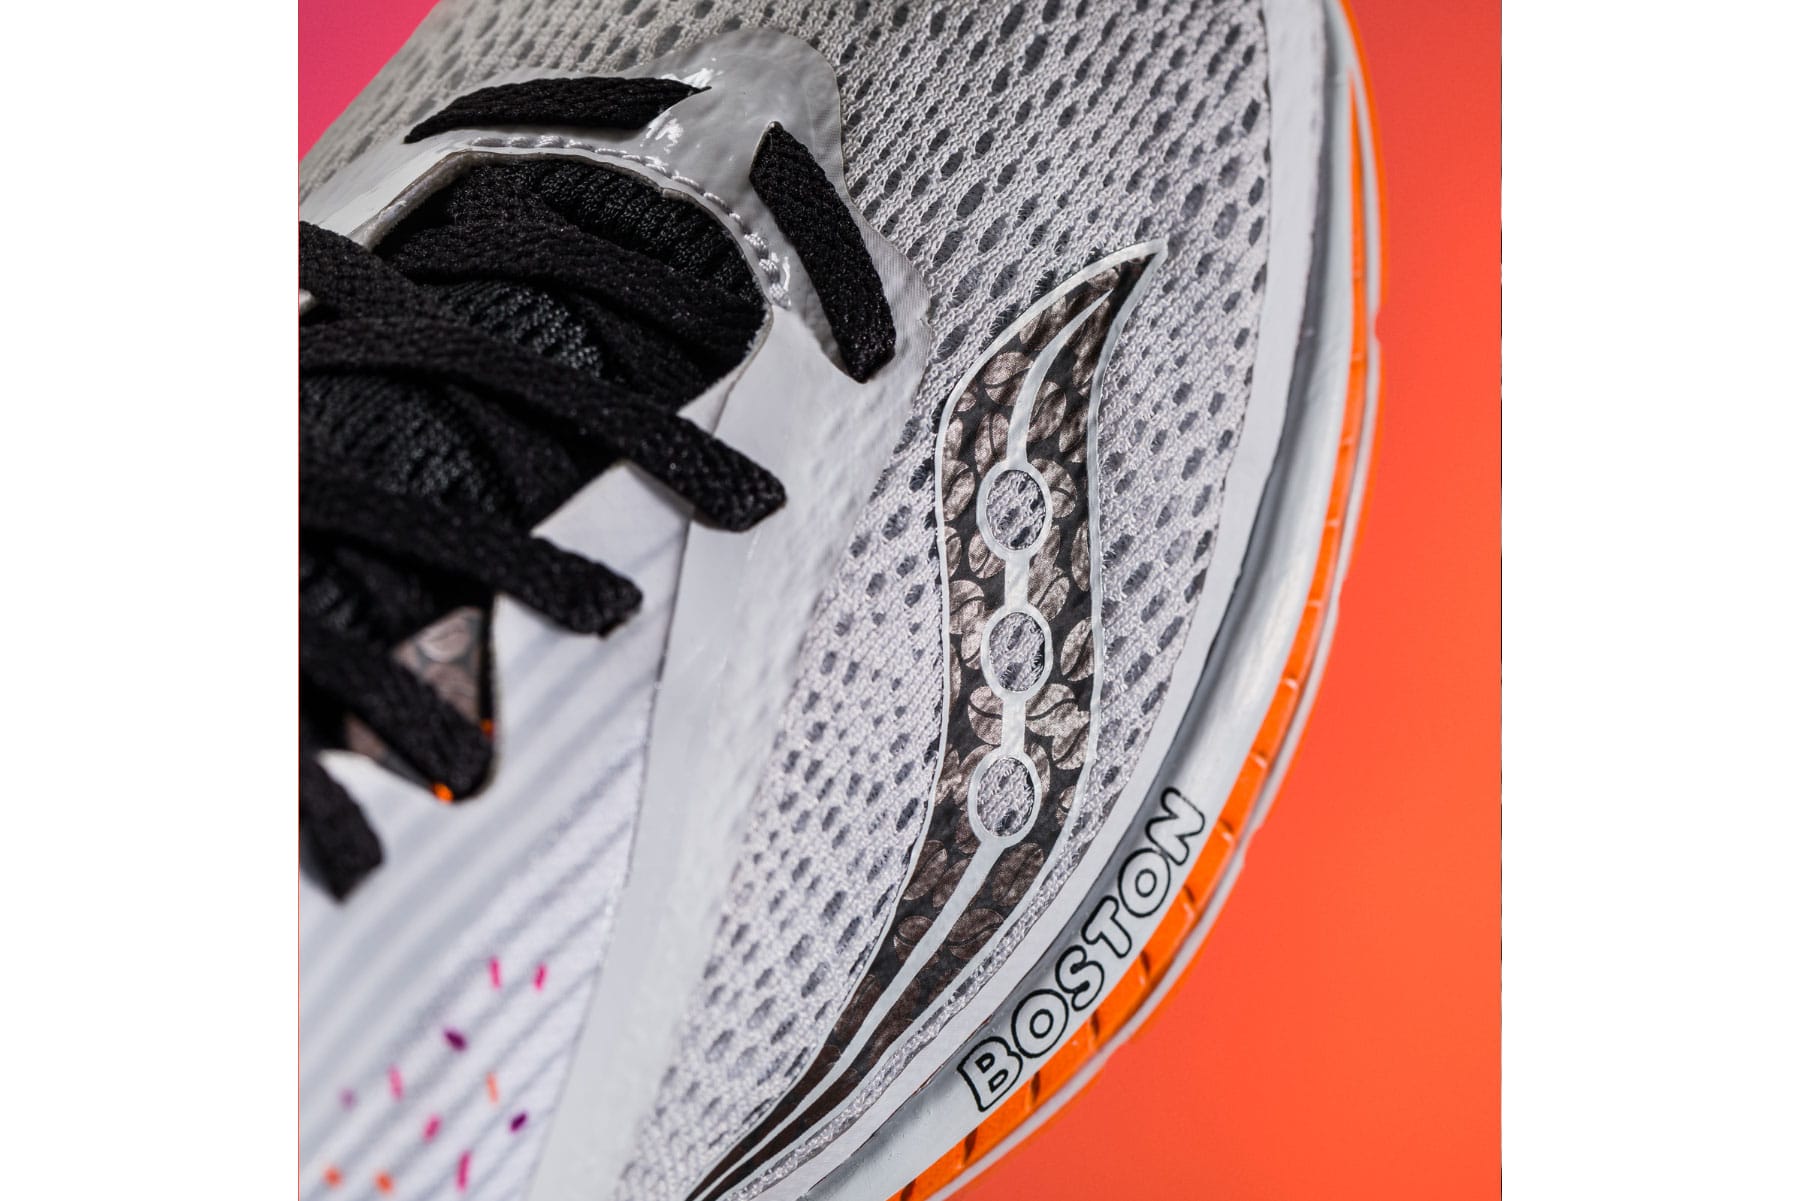 saucony dunkin donuts 2018